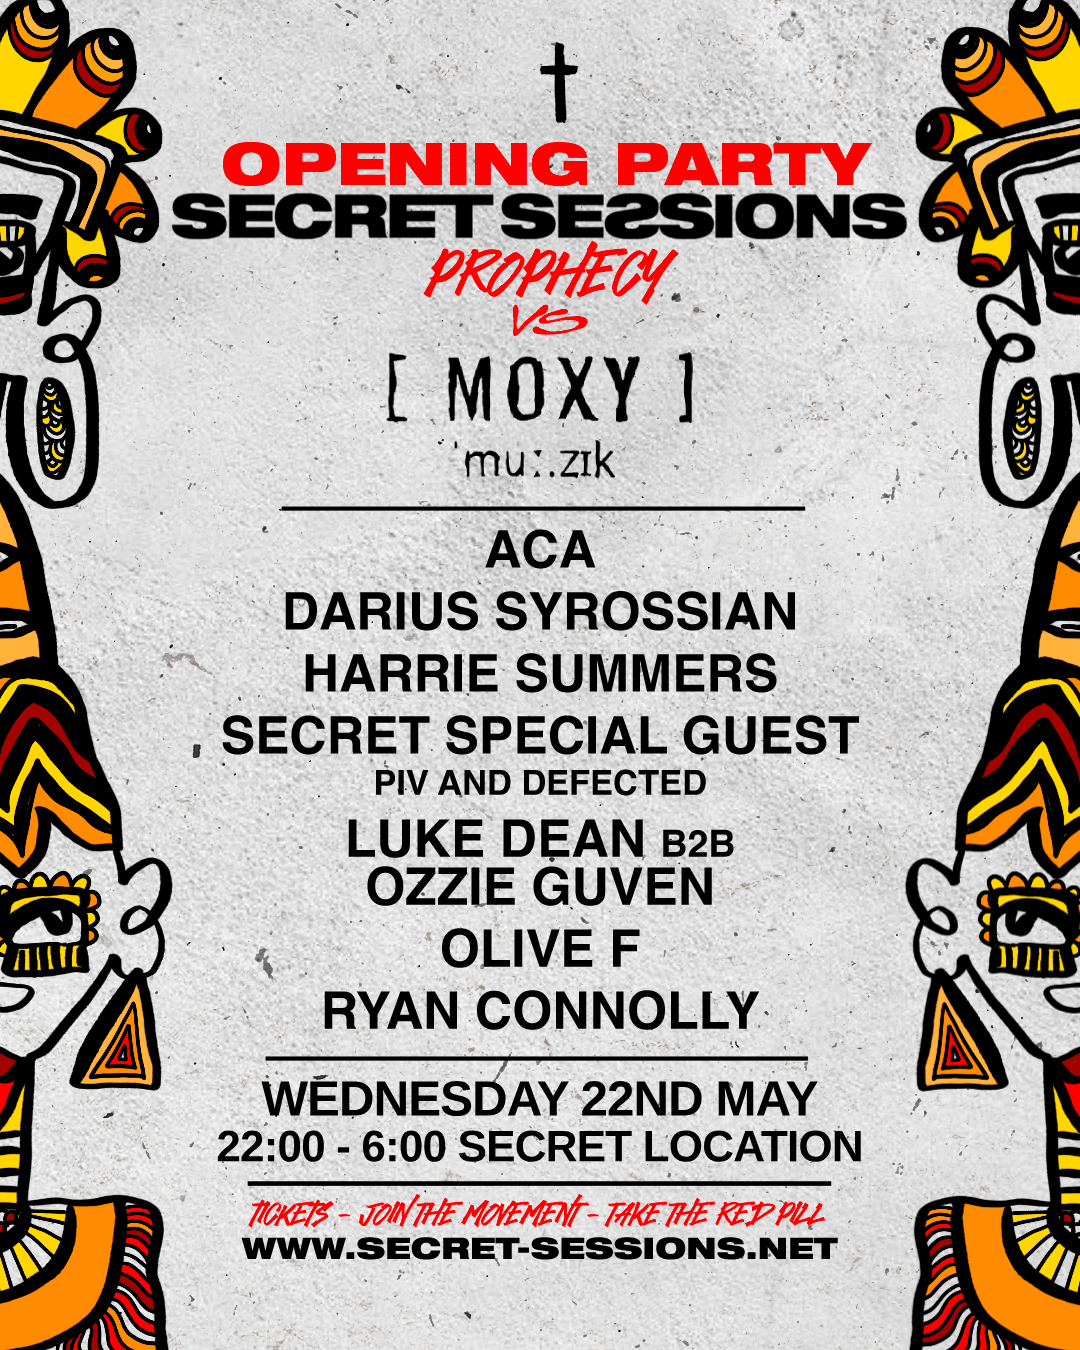 Secret Sessions x Moxy - Prophecy - Opening Party IBIZA - Página frontal